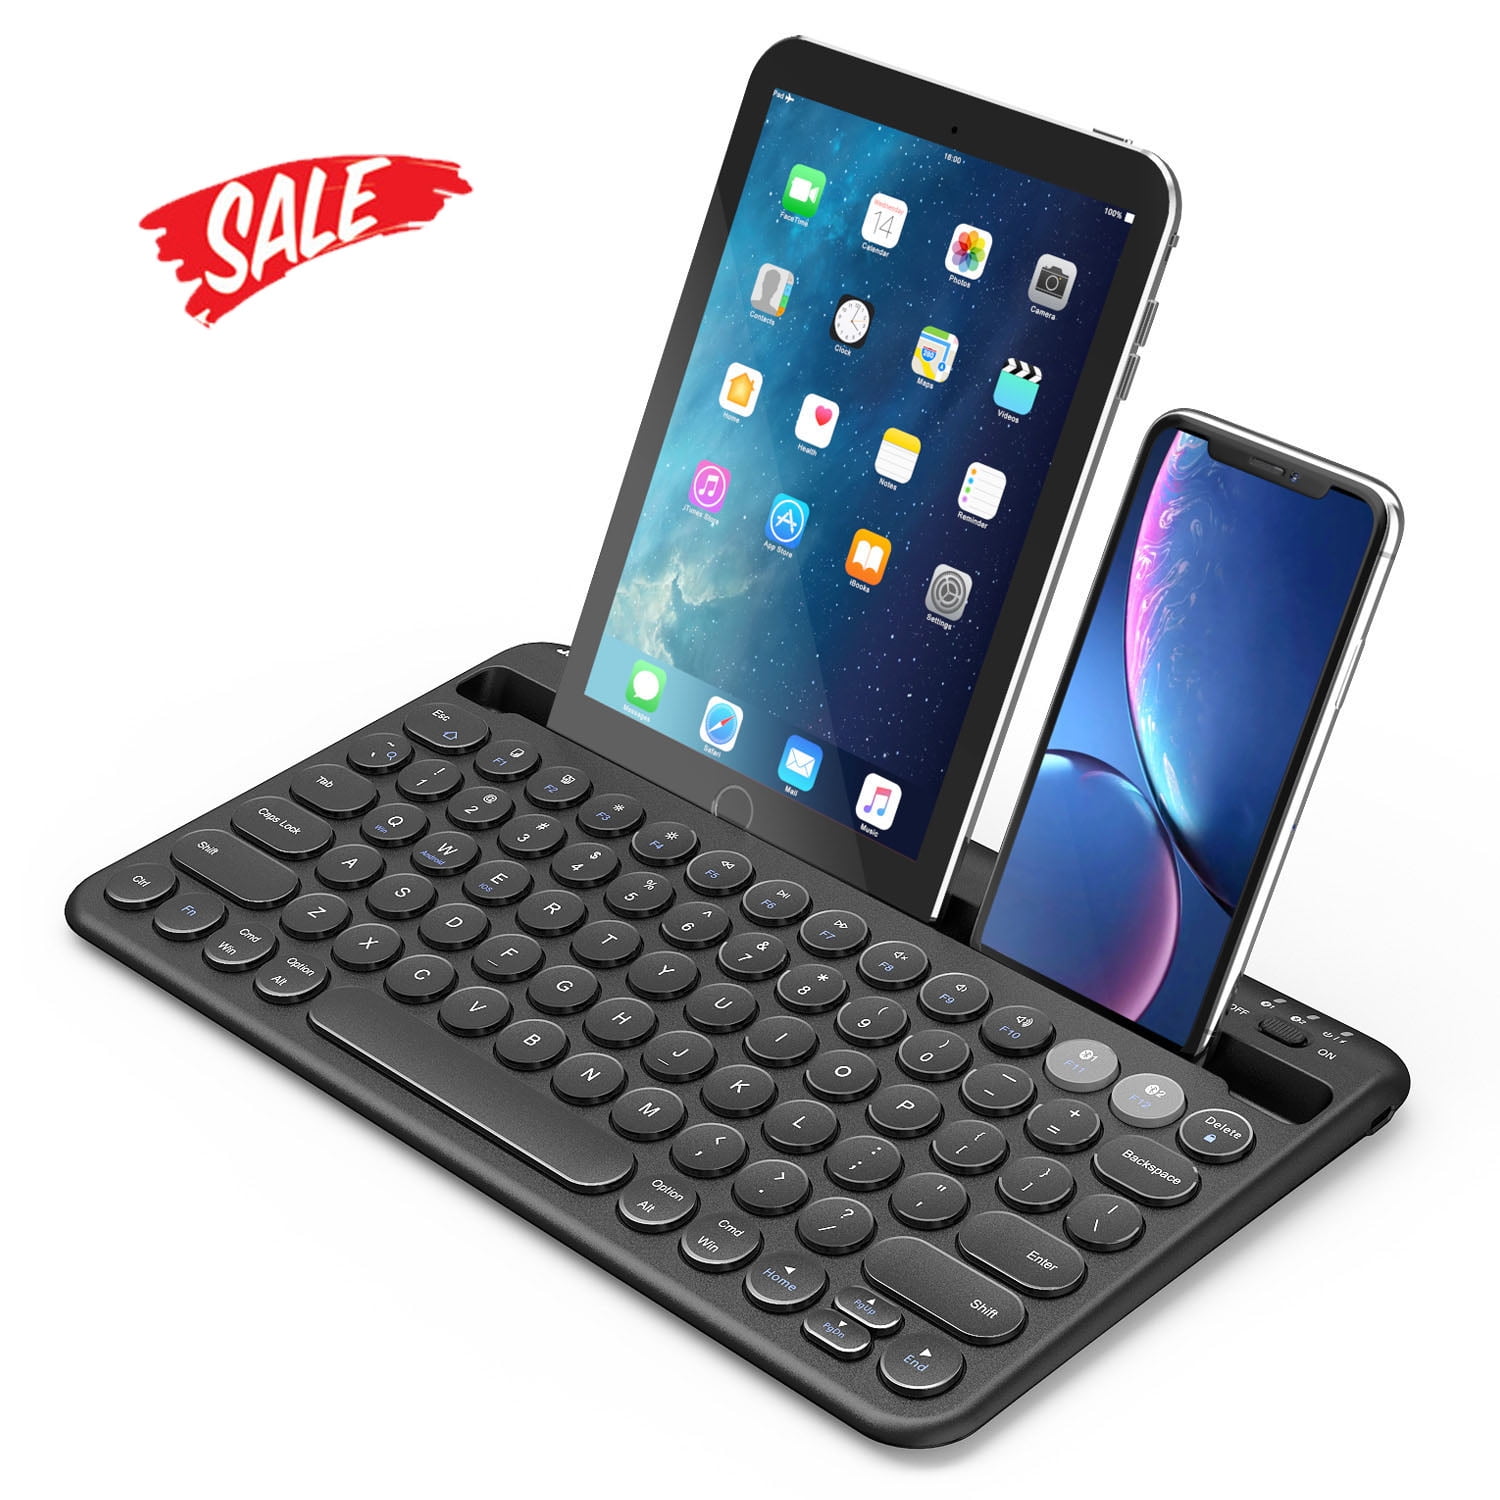 Bluetooth Keyboard Rechargeable Multi-Device Universal Bluetooth Keyboard Dual Channel with Cradle for iPhone Tablet Smartphone PC MacBook Android iOS Windows Devices Pink 